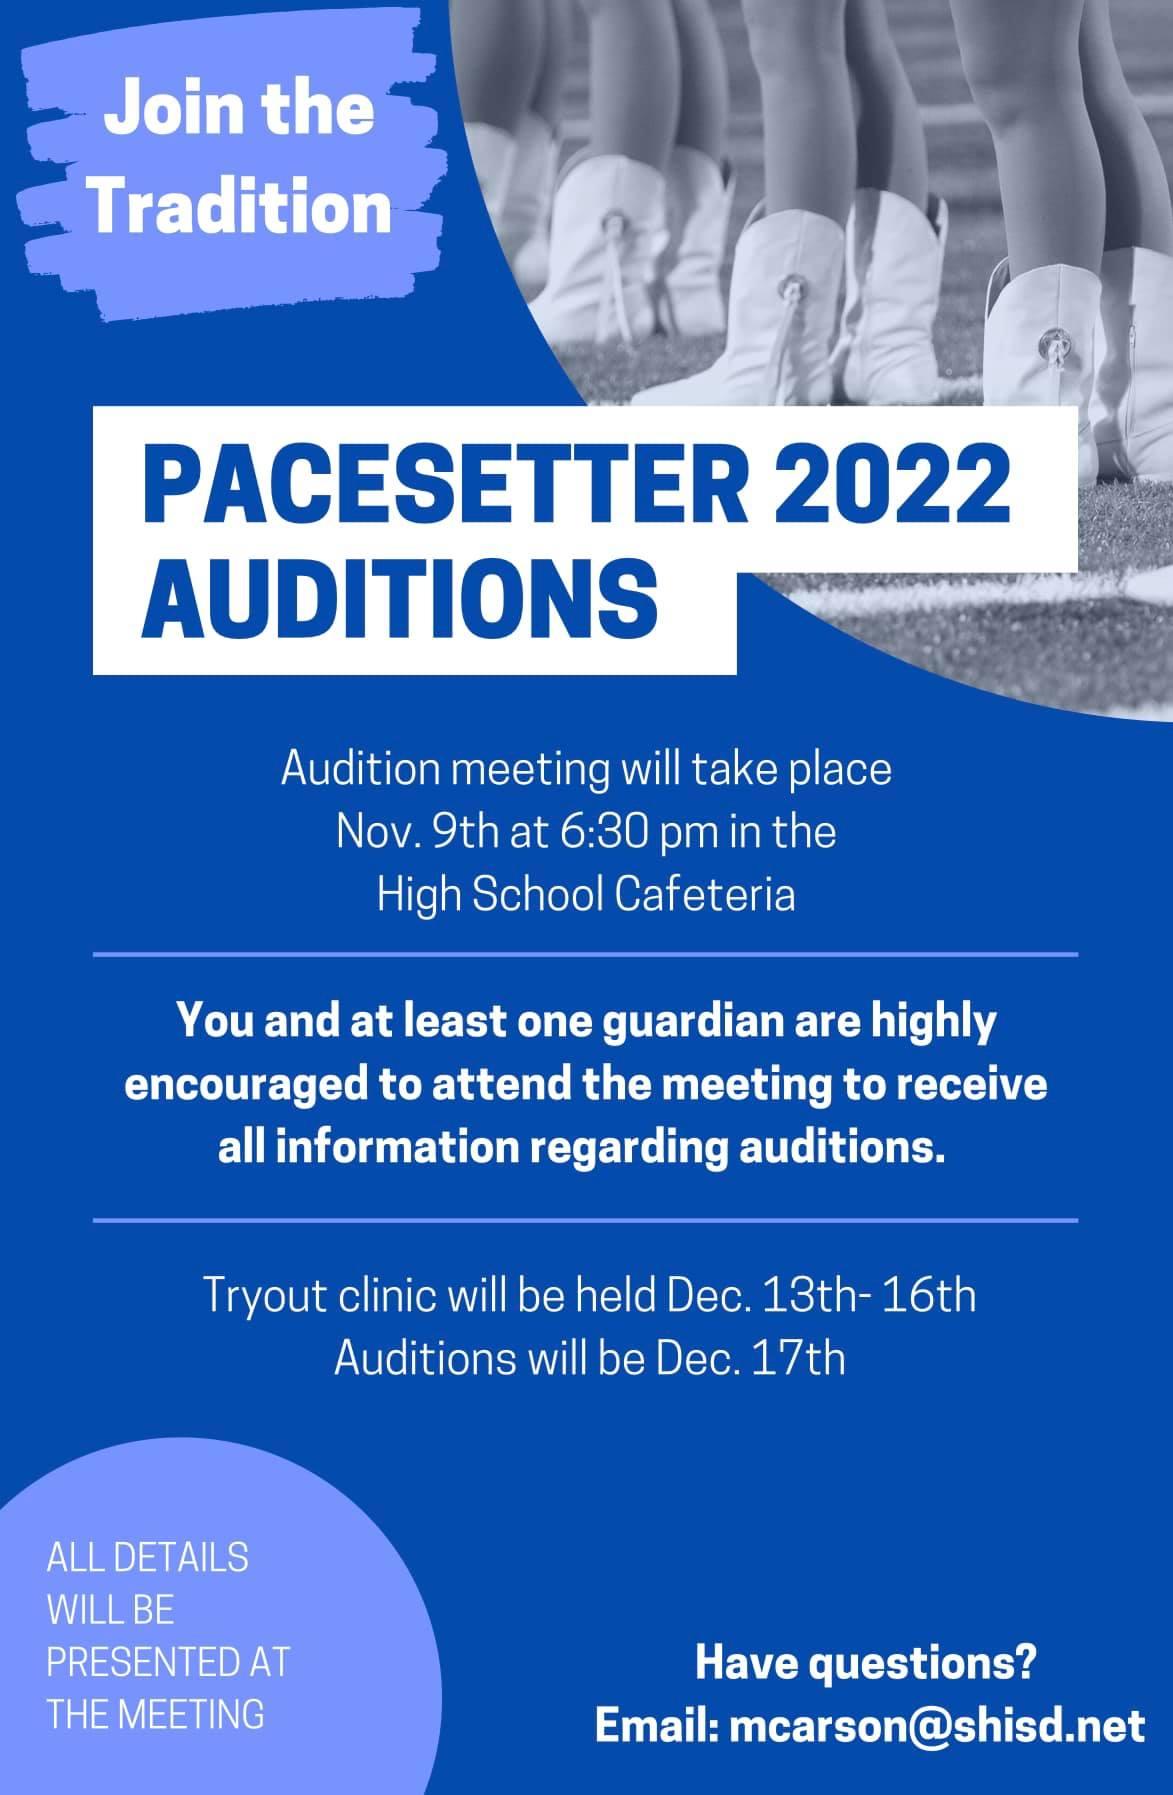 Pacesetter Audition Meeting TONIGHT! 